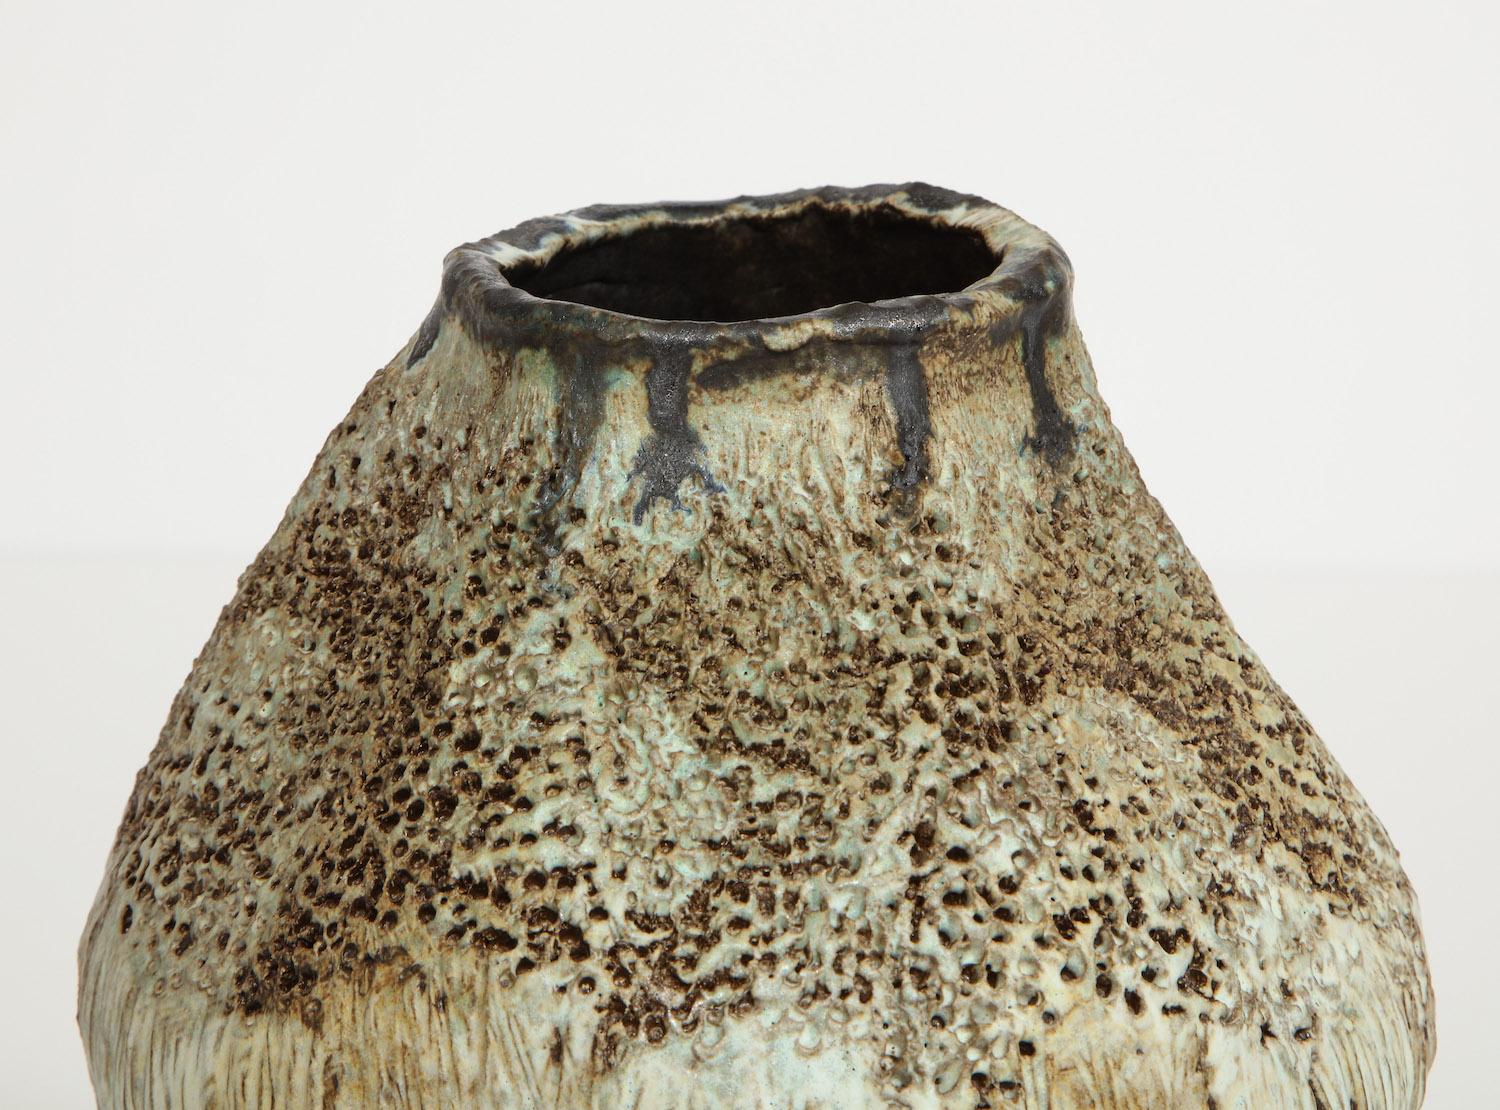 Bulbous form vase on central foot with great texture and pale glazes. Hand-built stoneware, signed and dated on underside.